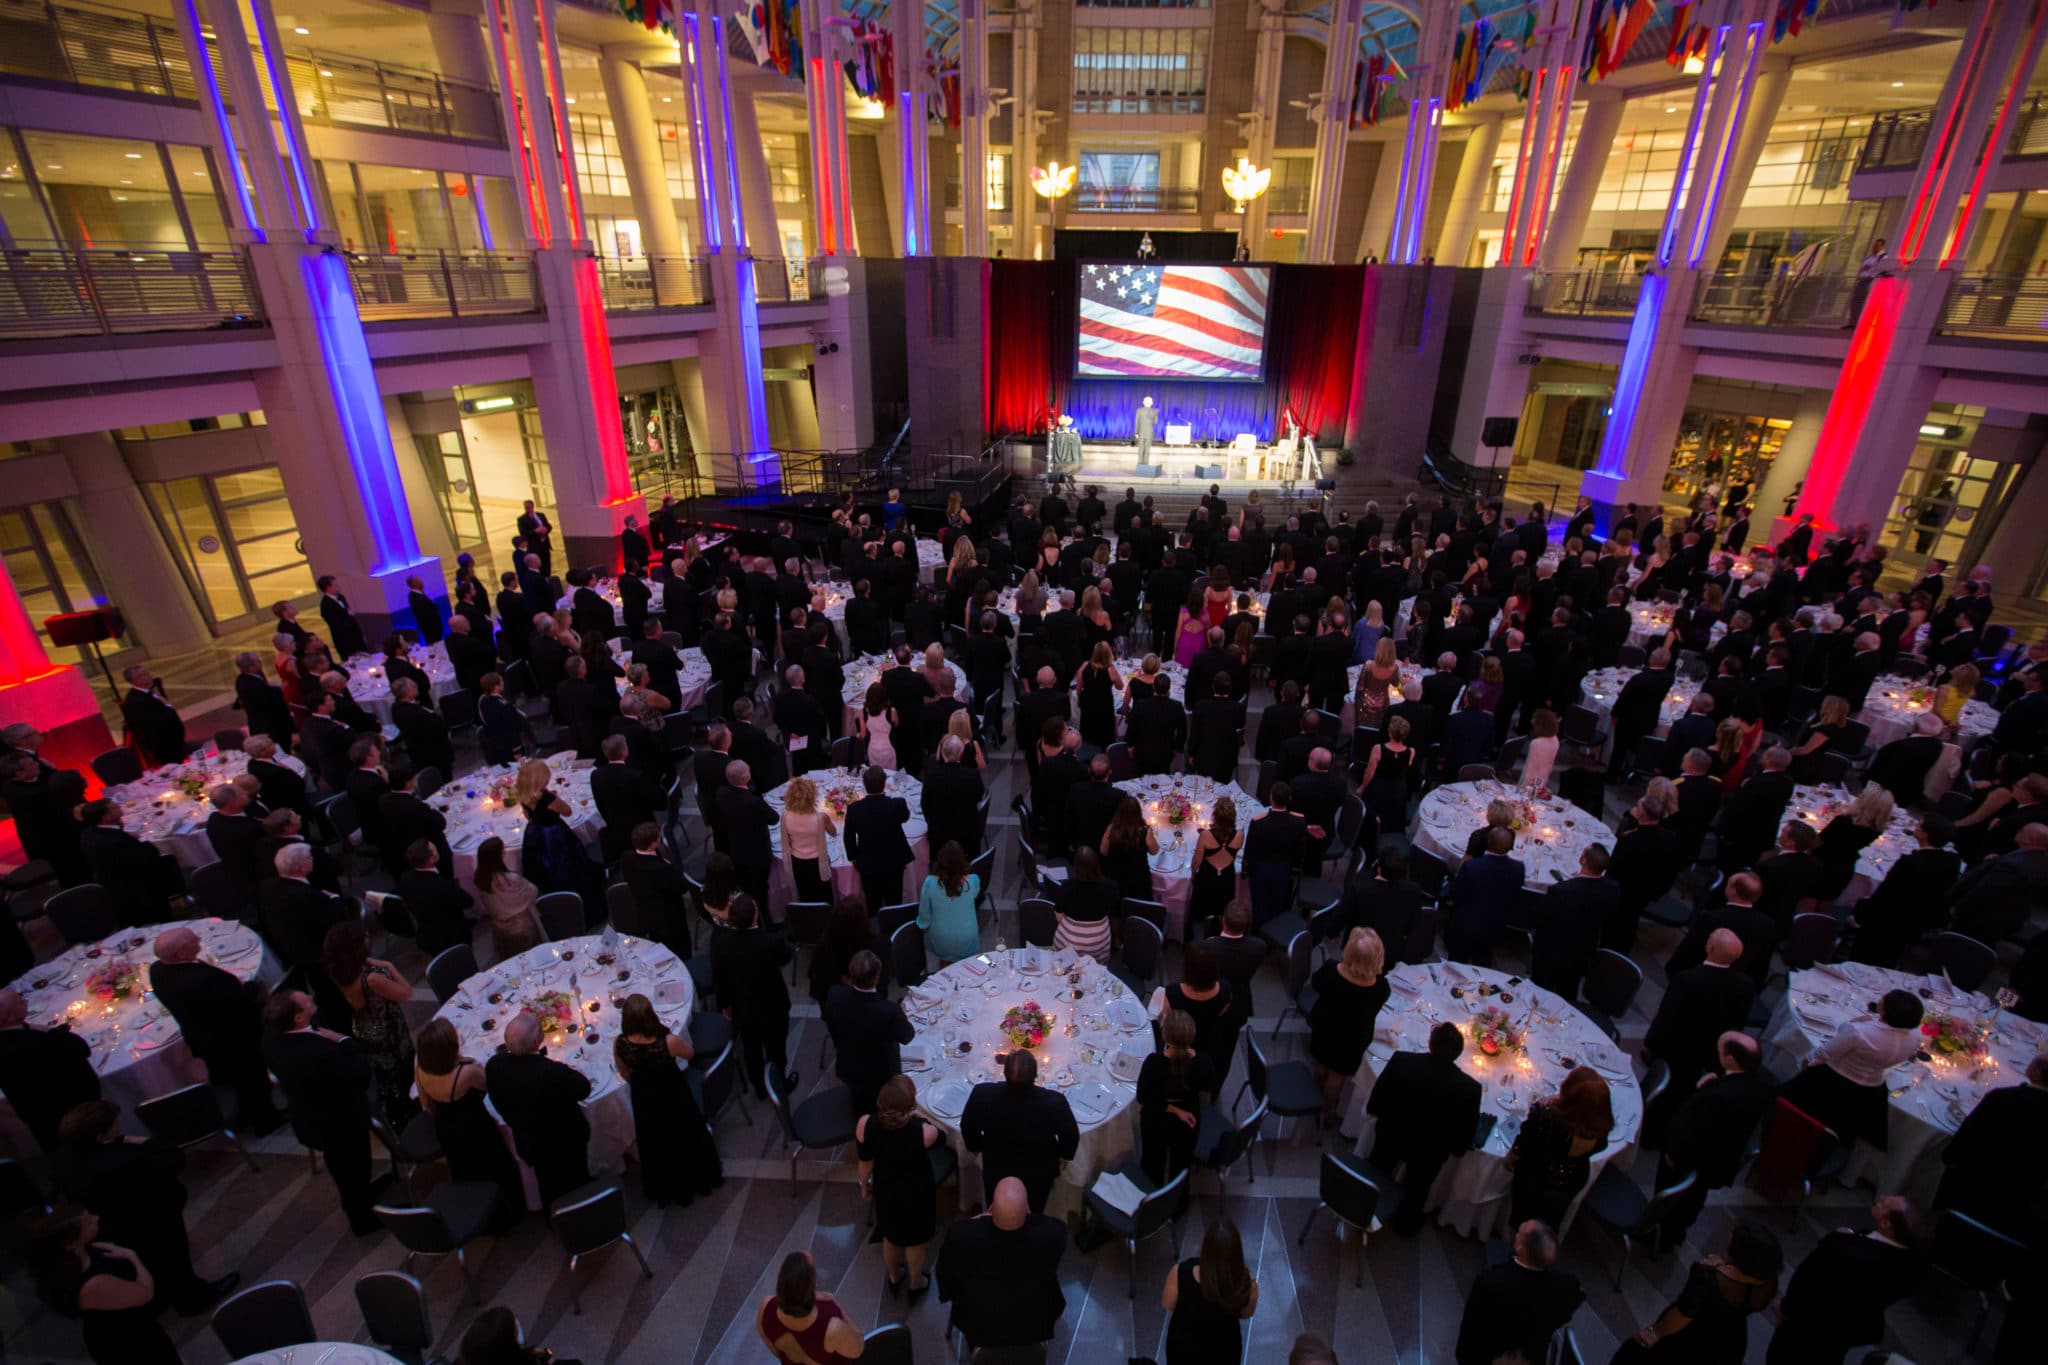 a view of the venue for the Eisenhower Awards Gala